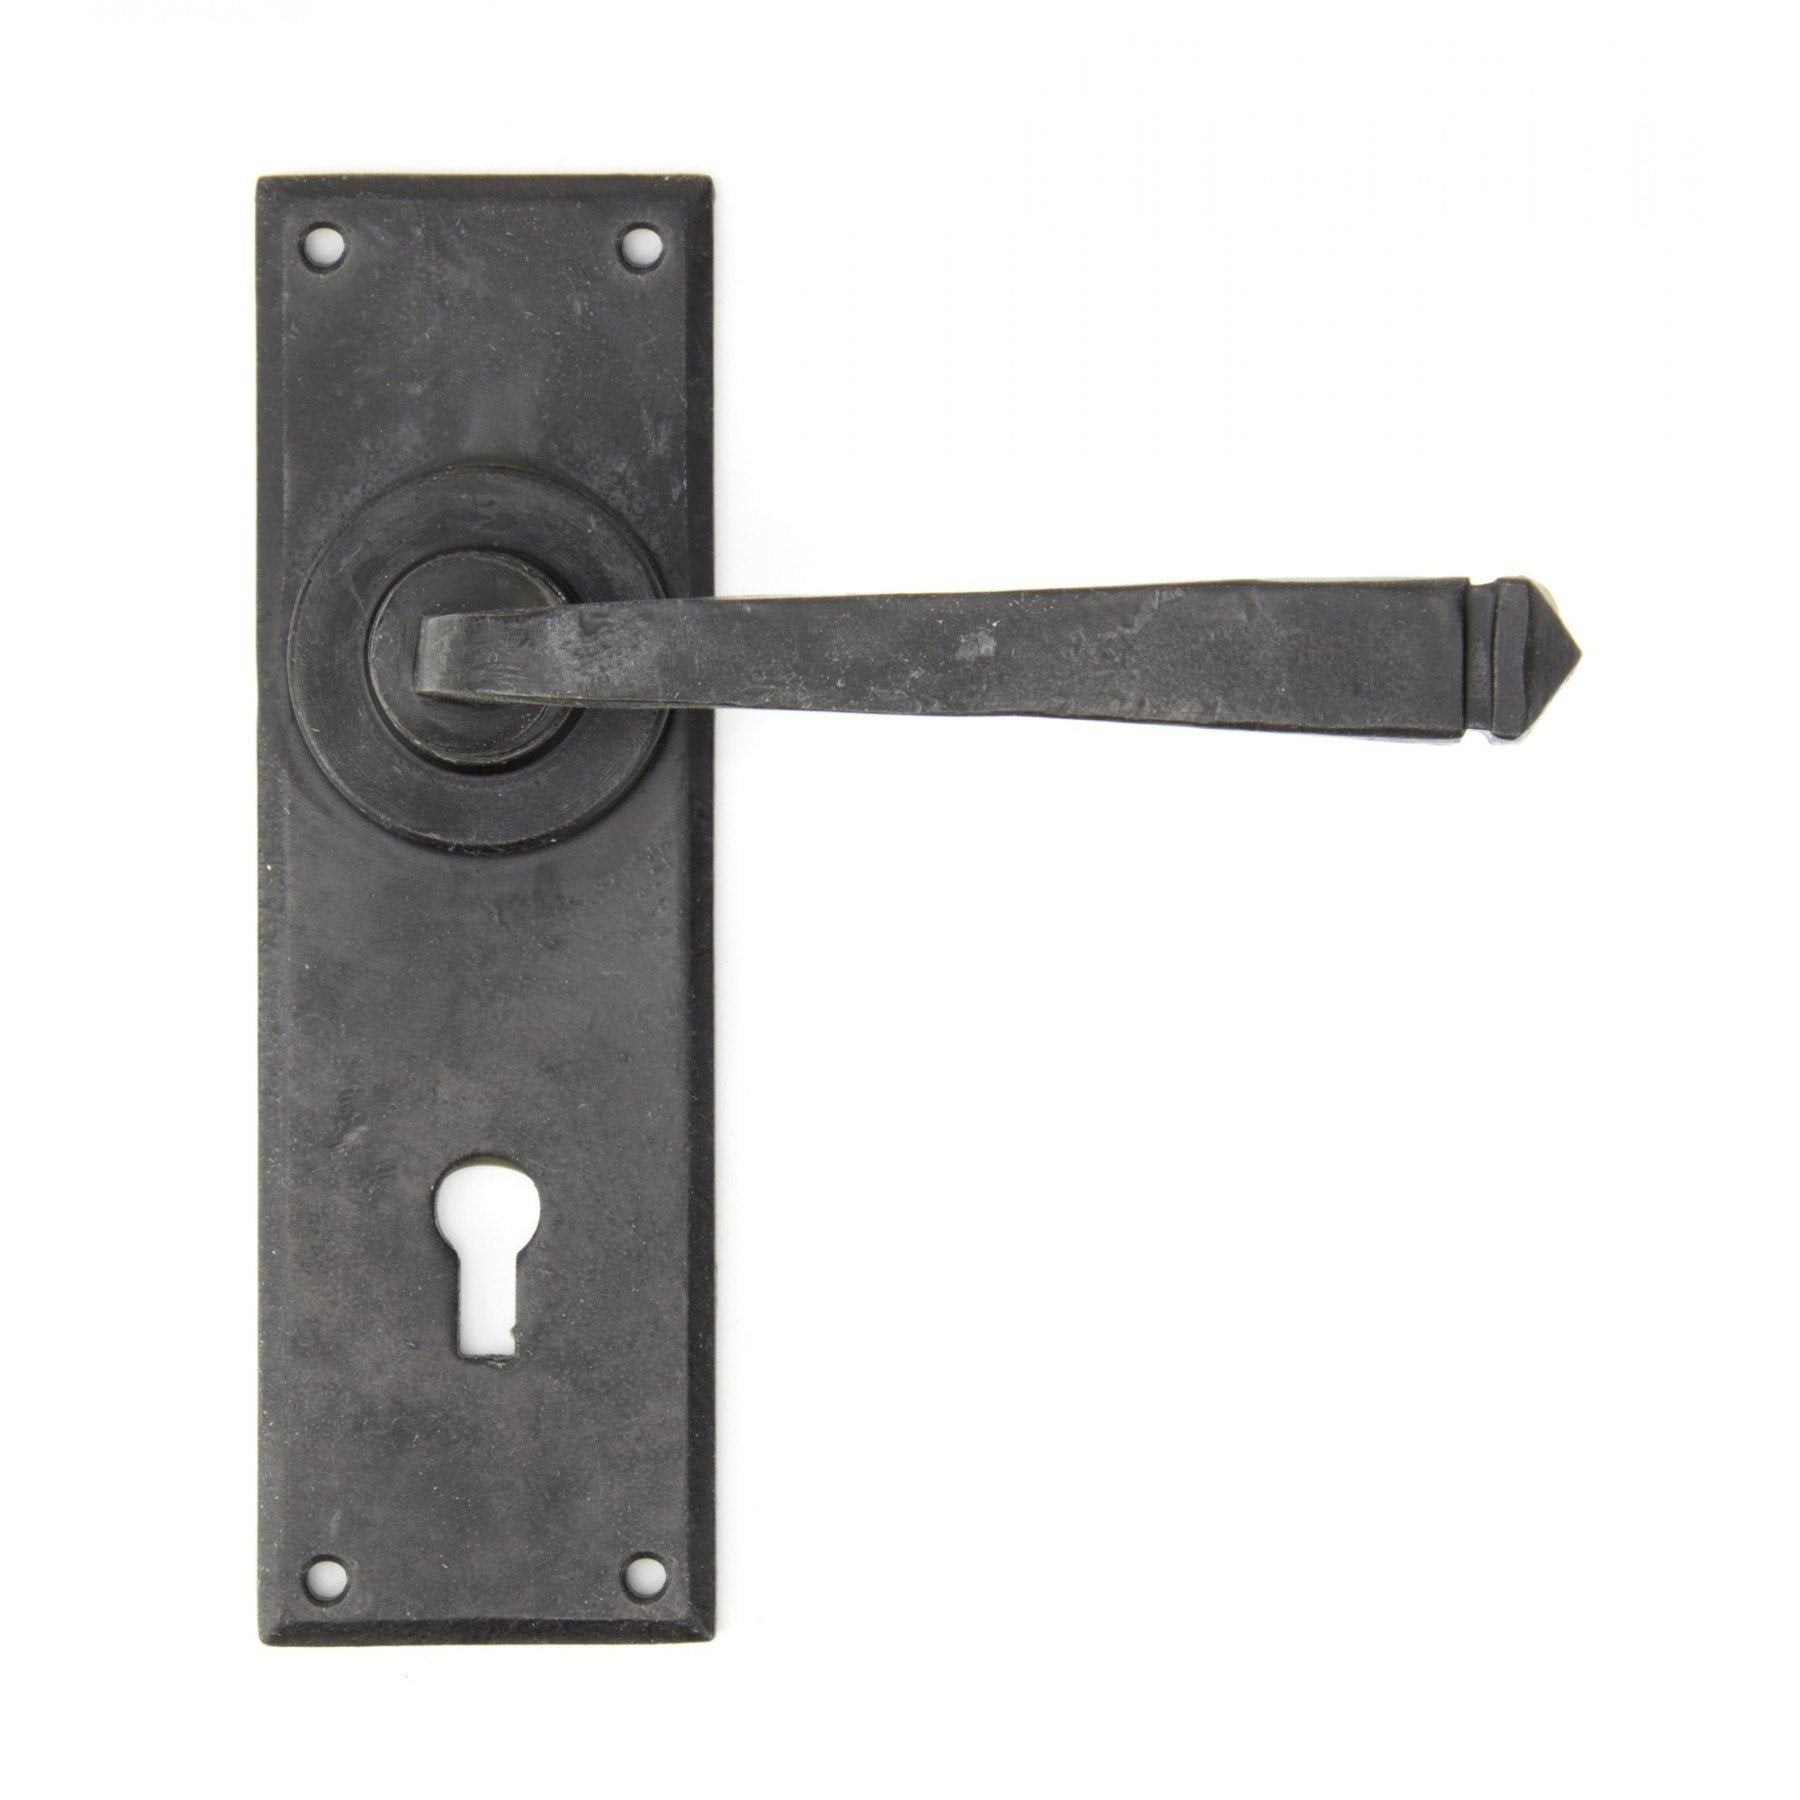 From the Anvil External Beeswax Avon Lever Lock Set - No.42 Interiors